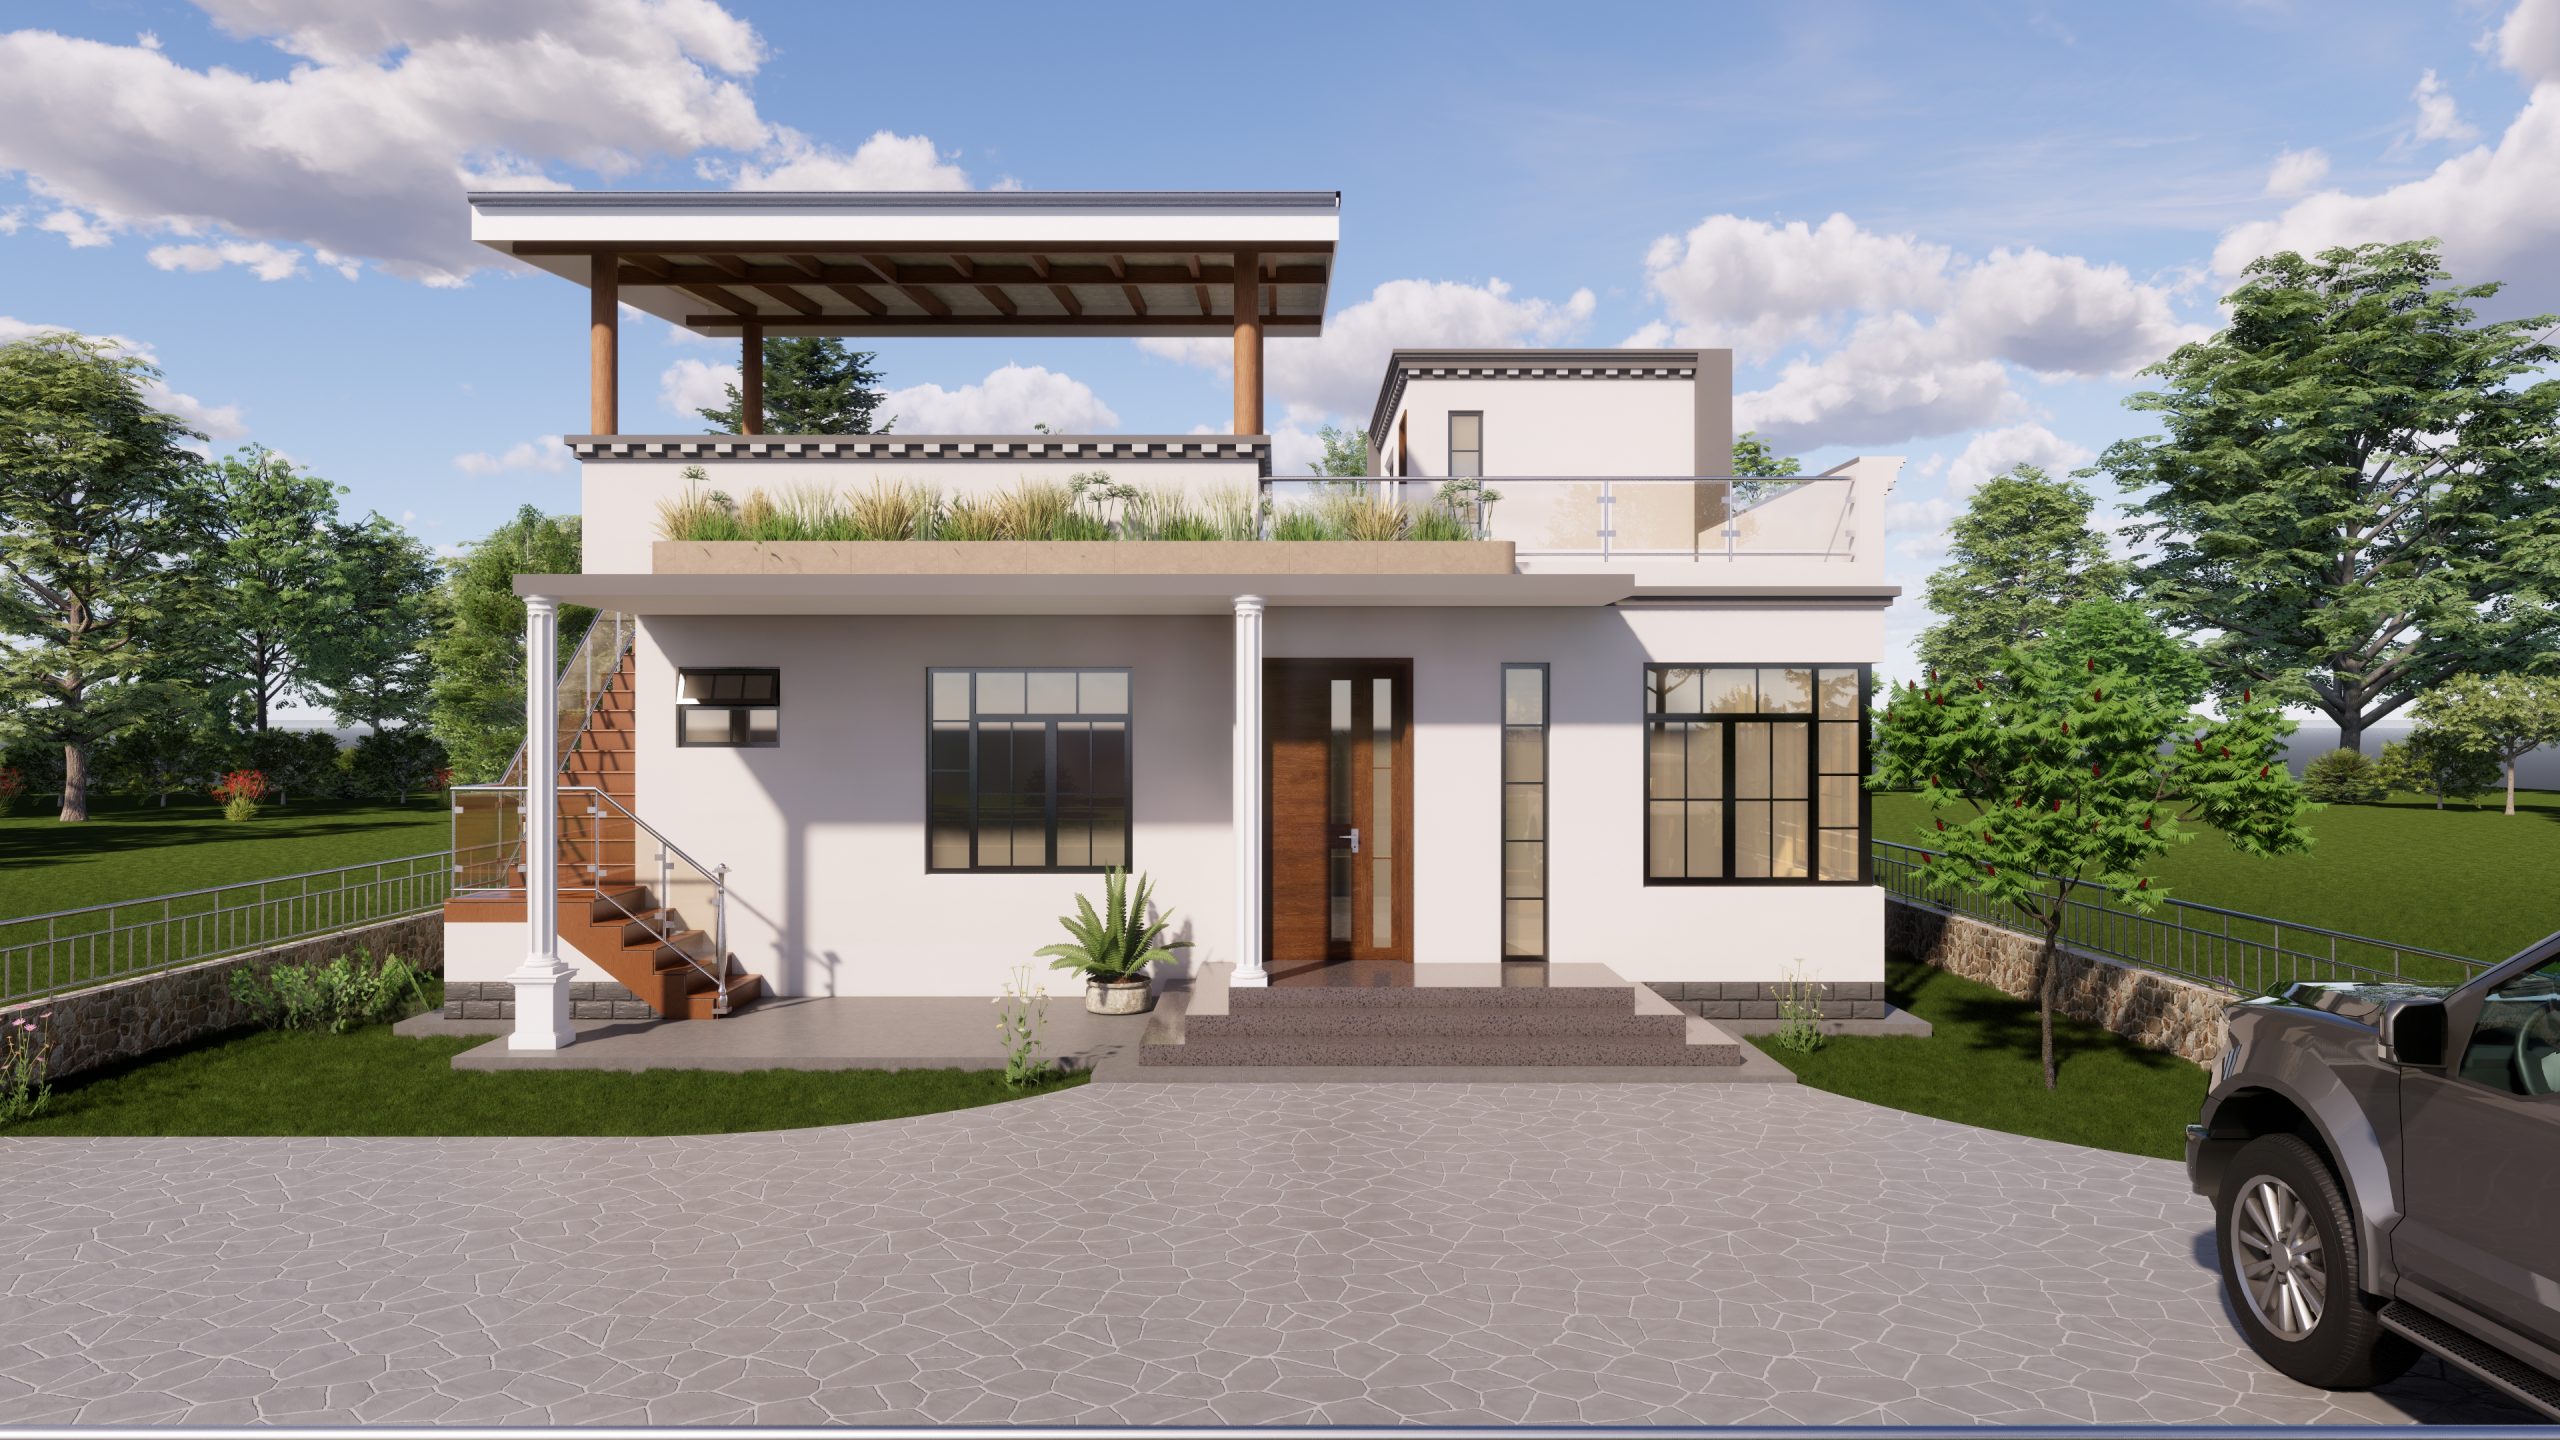 A Comely Three Bedroom House Design with a Flat Roof